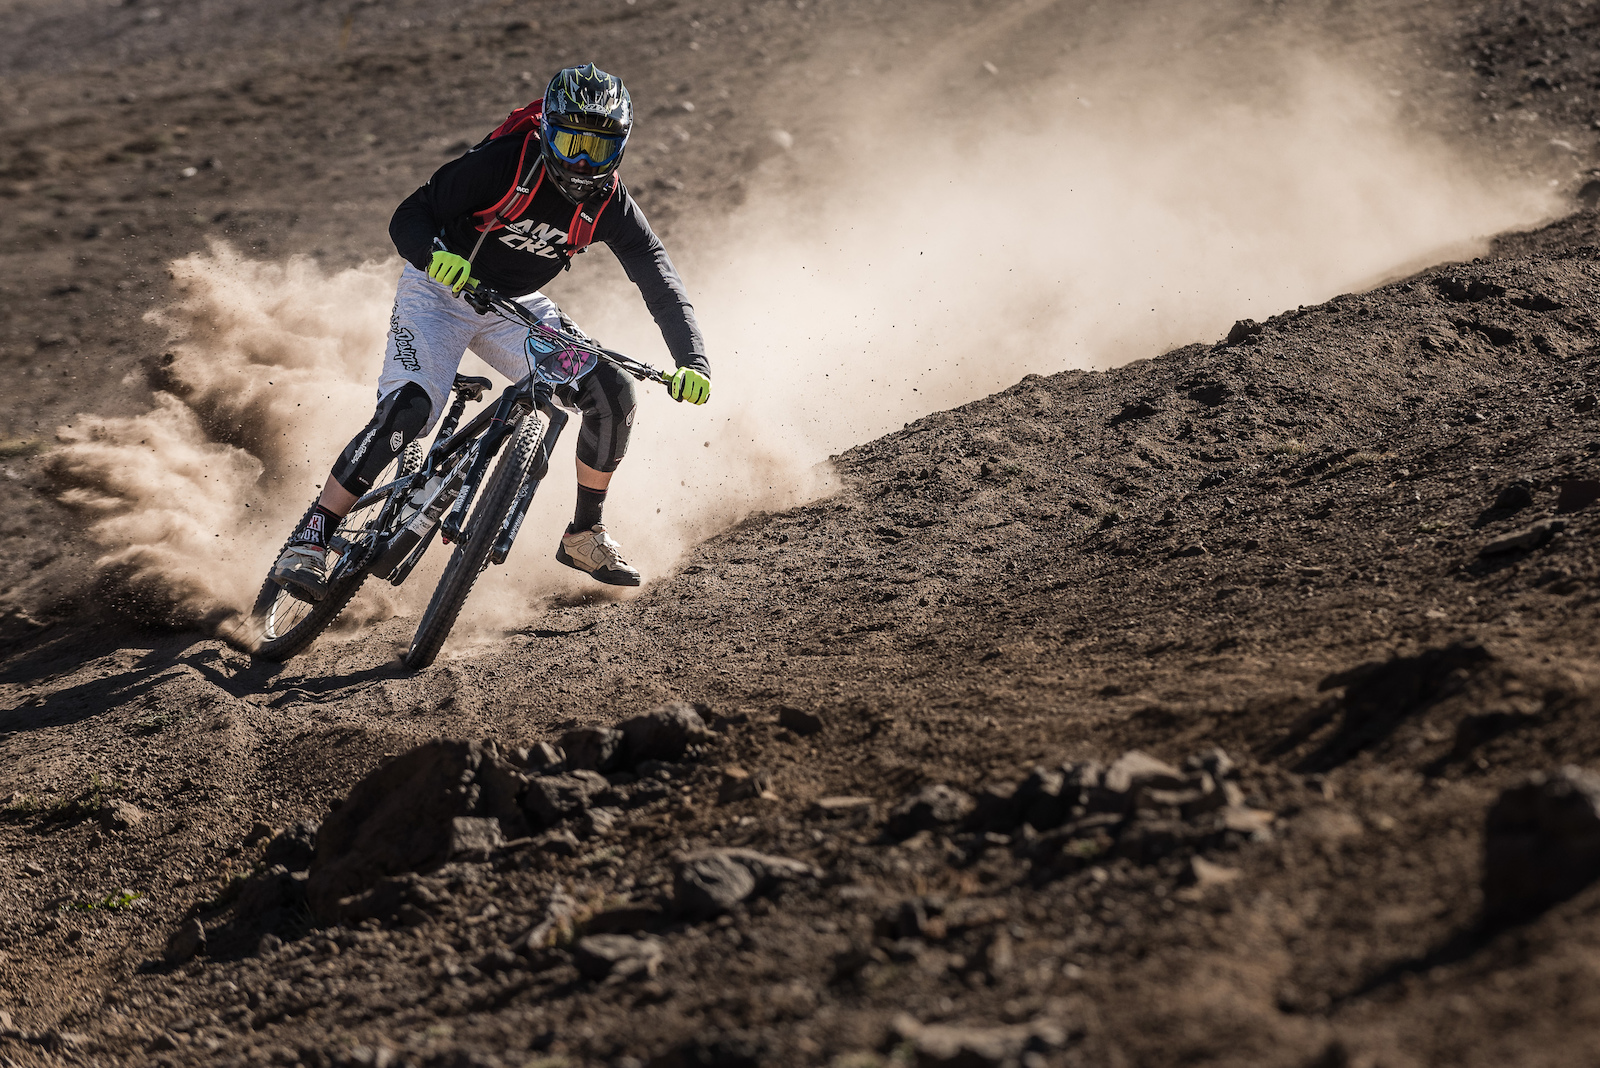 Santa Cruz Bicycles events manager Alan Cooke made the trip to Chile and had no trouble showing the the loose and unpredictable dirt who s boss.